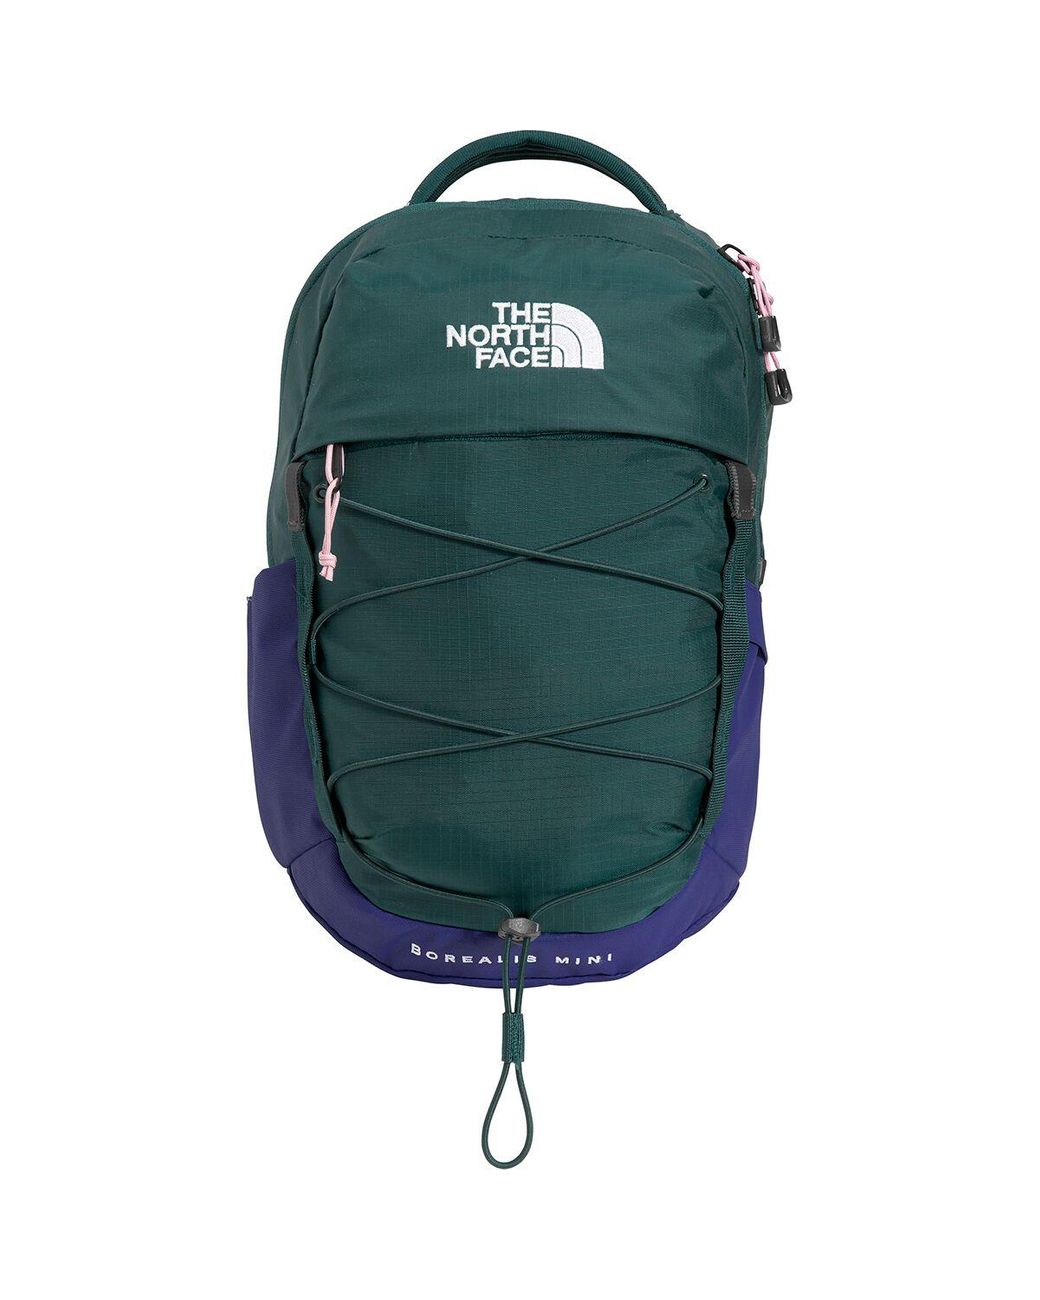 The North Face Borealis Mini 10l Backpack in Green for Men | Lyst